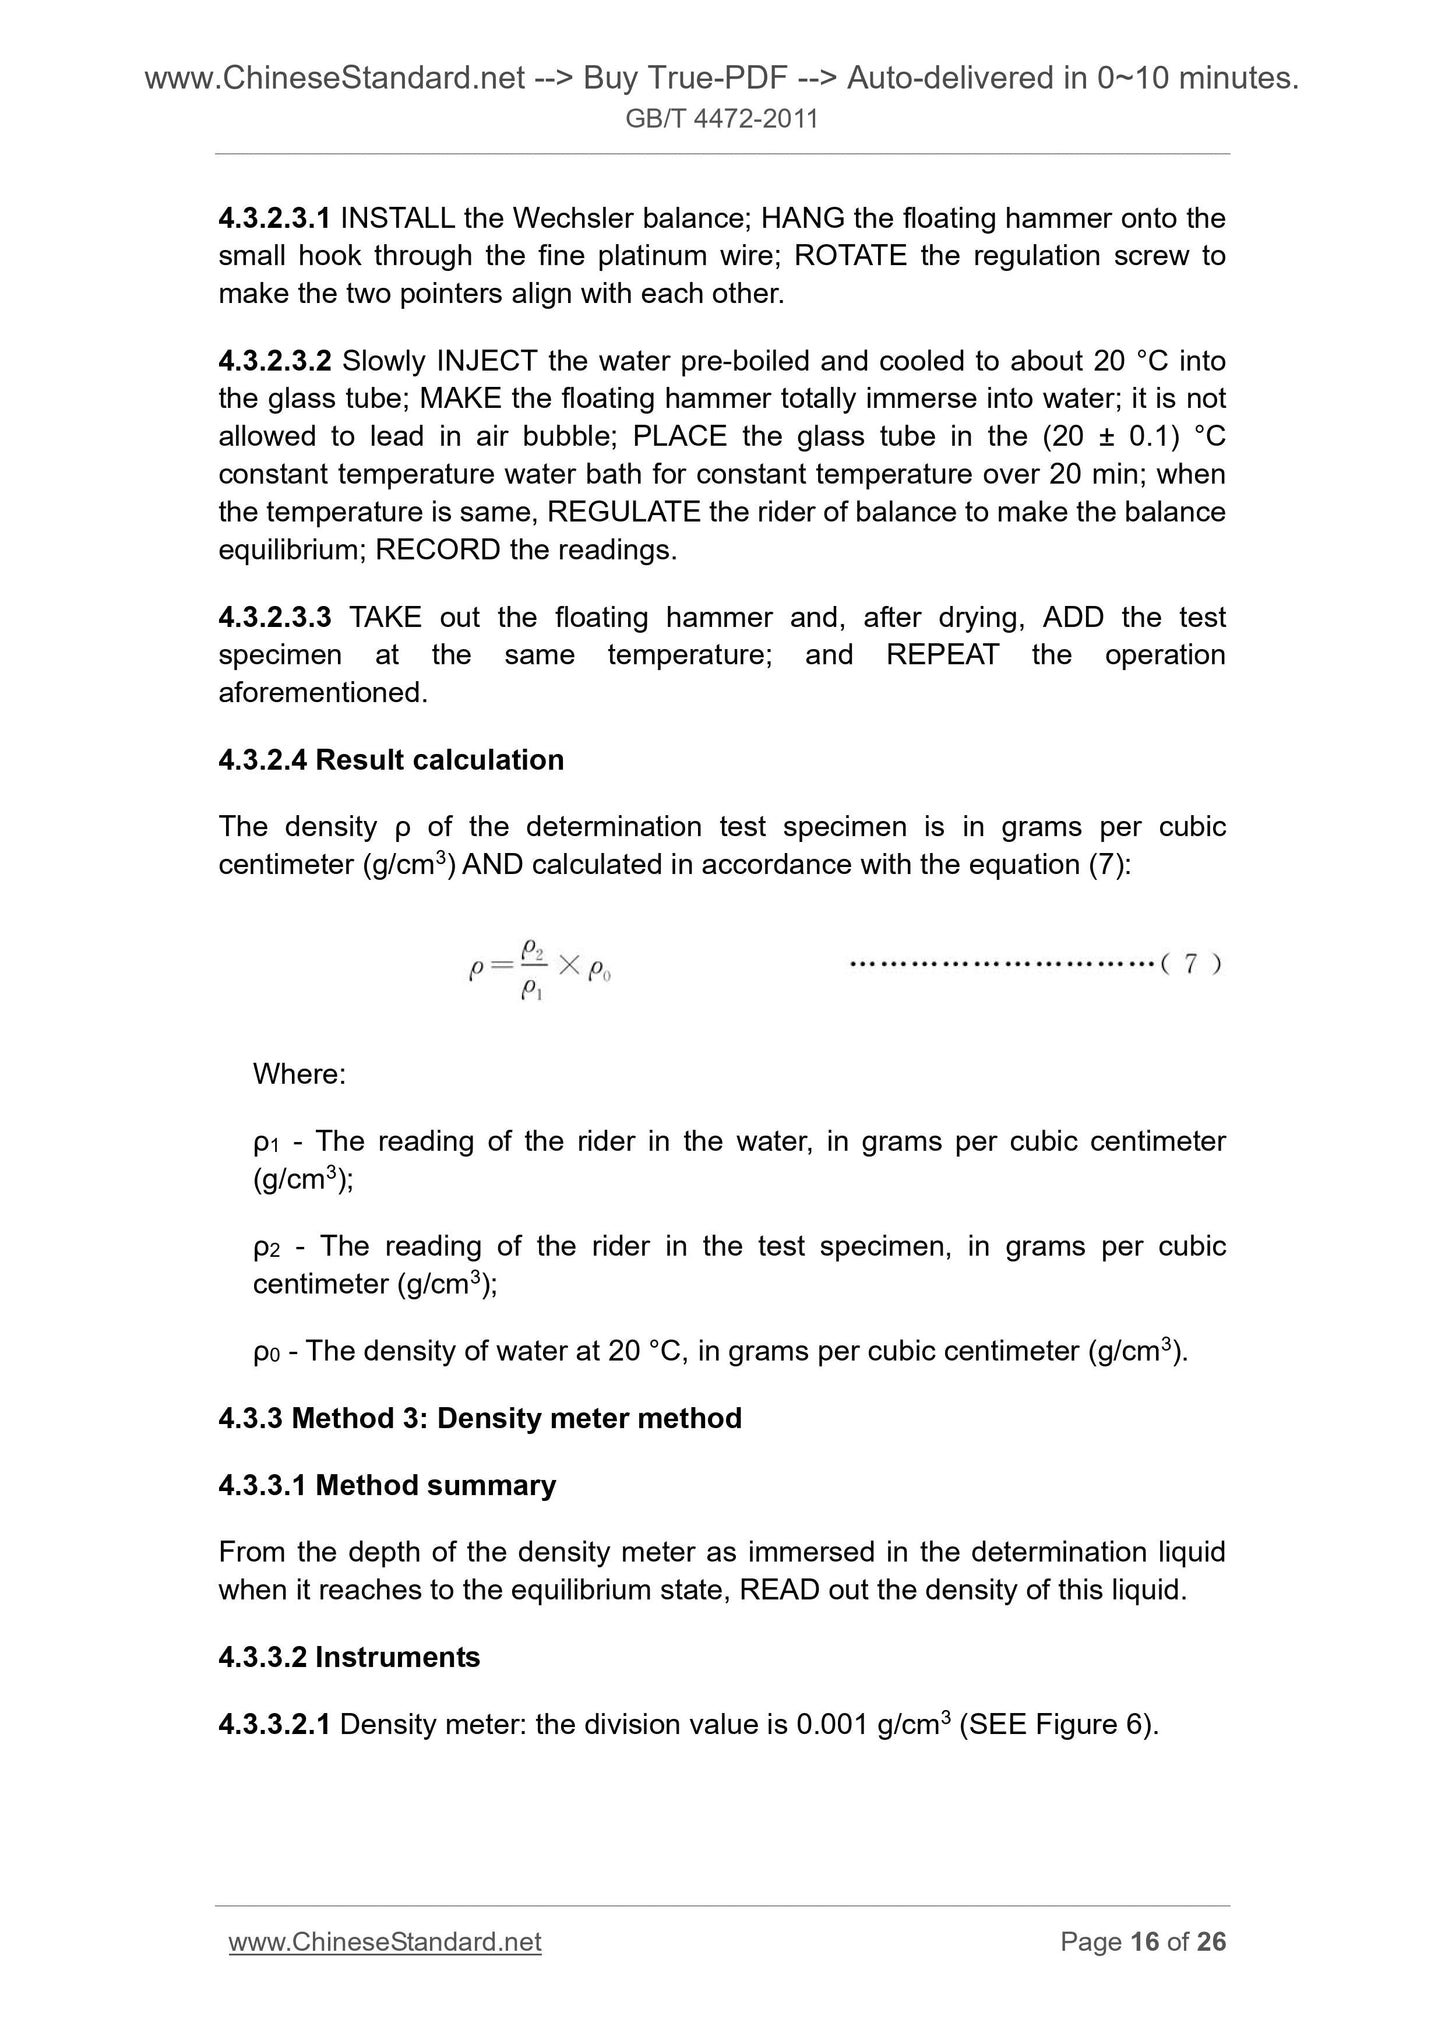 GB/T 4472-2011 Page 9